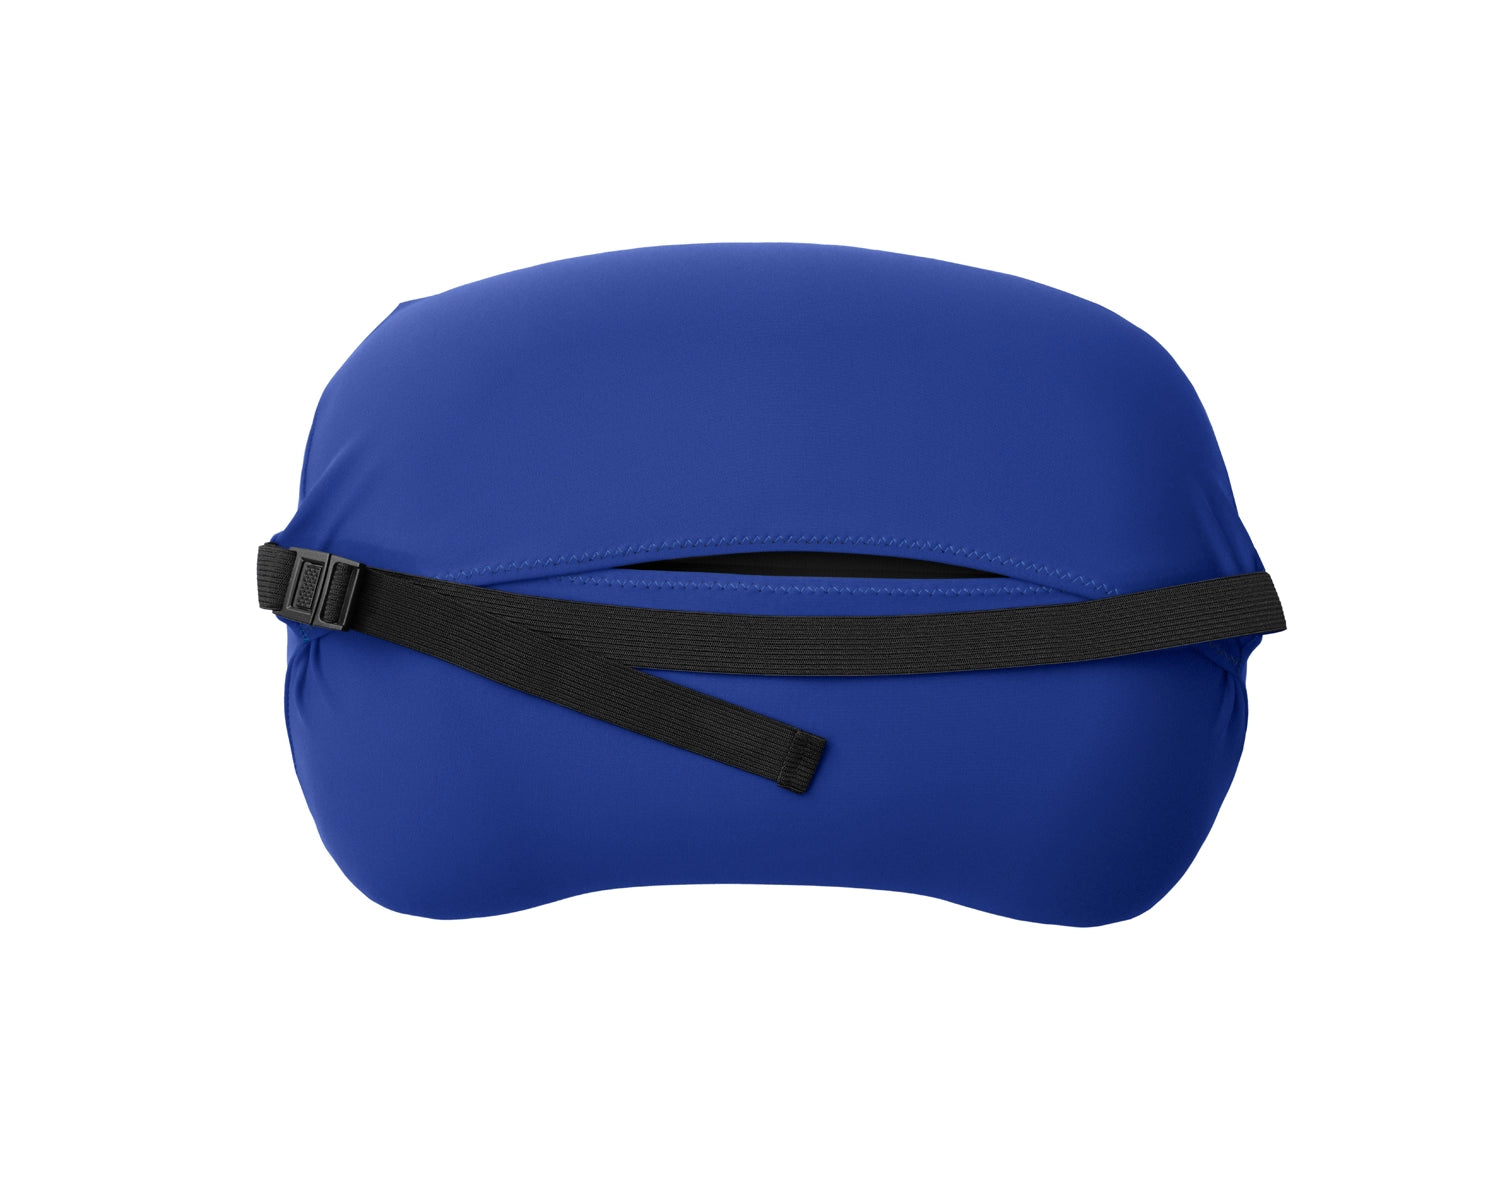 Trifold enclosure and strap of small in blue Pillow Strap to securely hold camp pillow to sleeping pad.